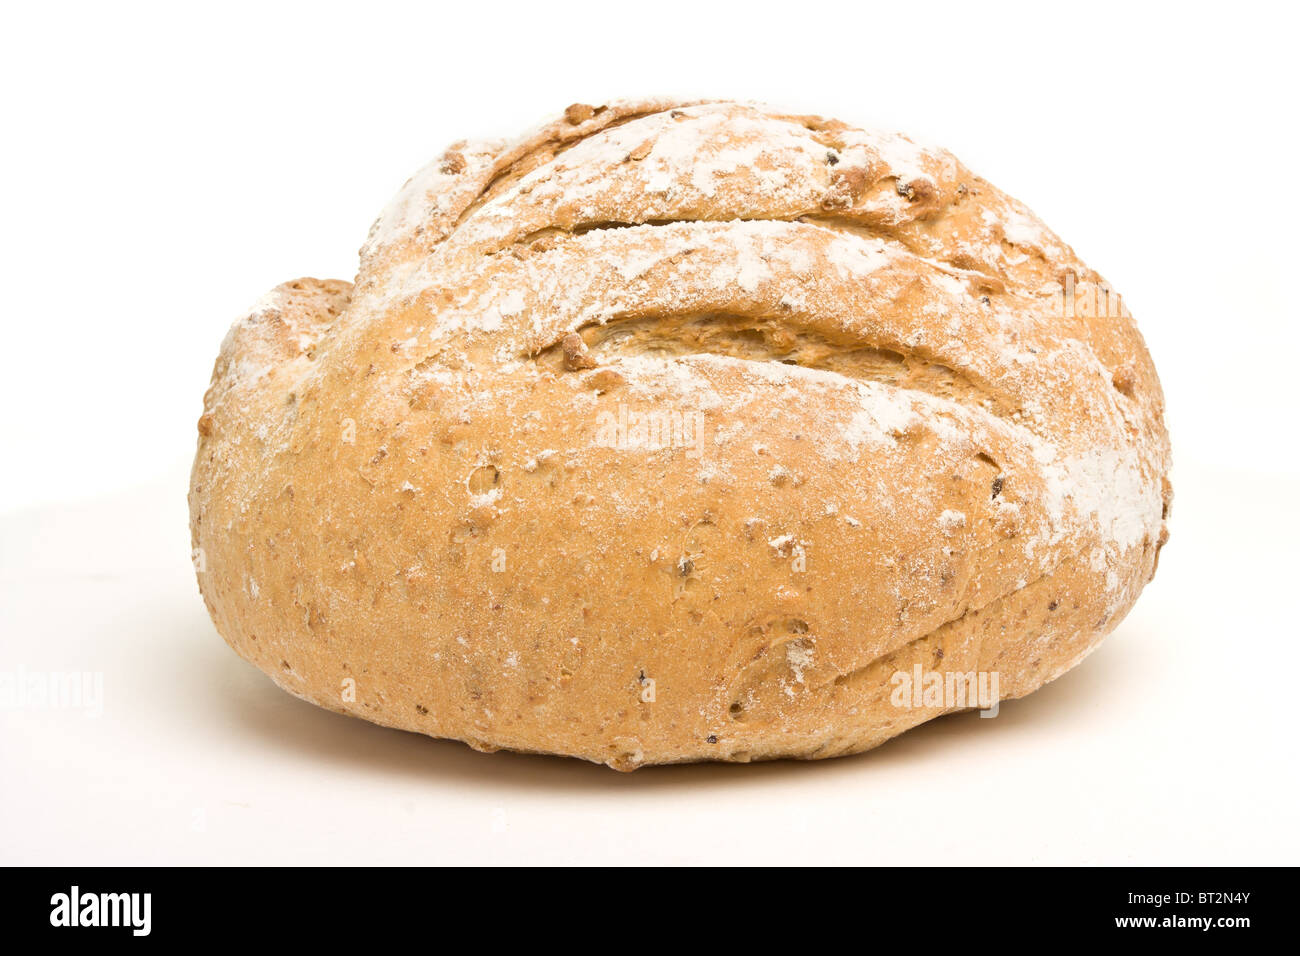 Handmade Spelt n Rye Bread from low perspective isolated on white. Stock Photo